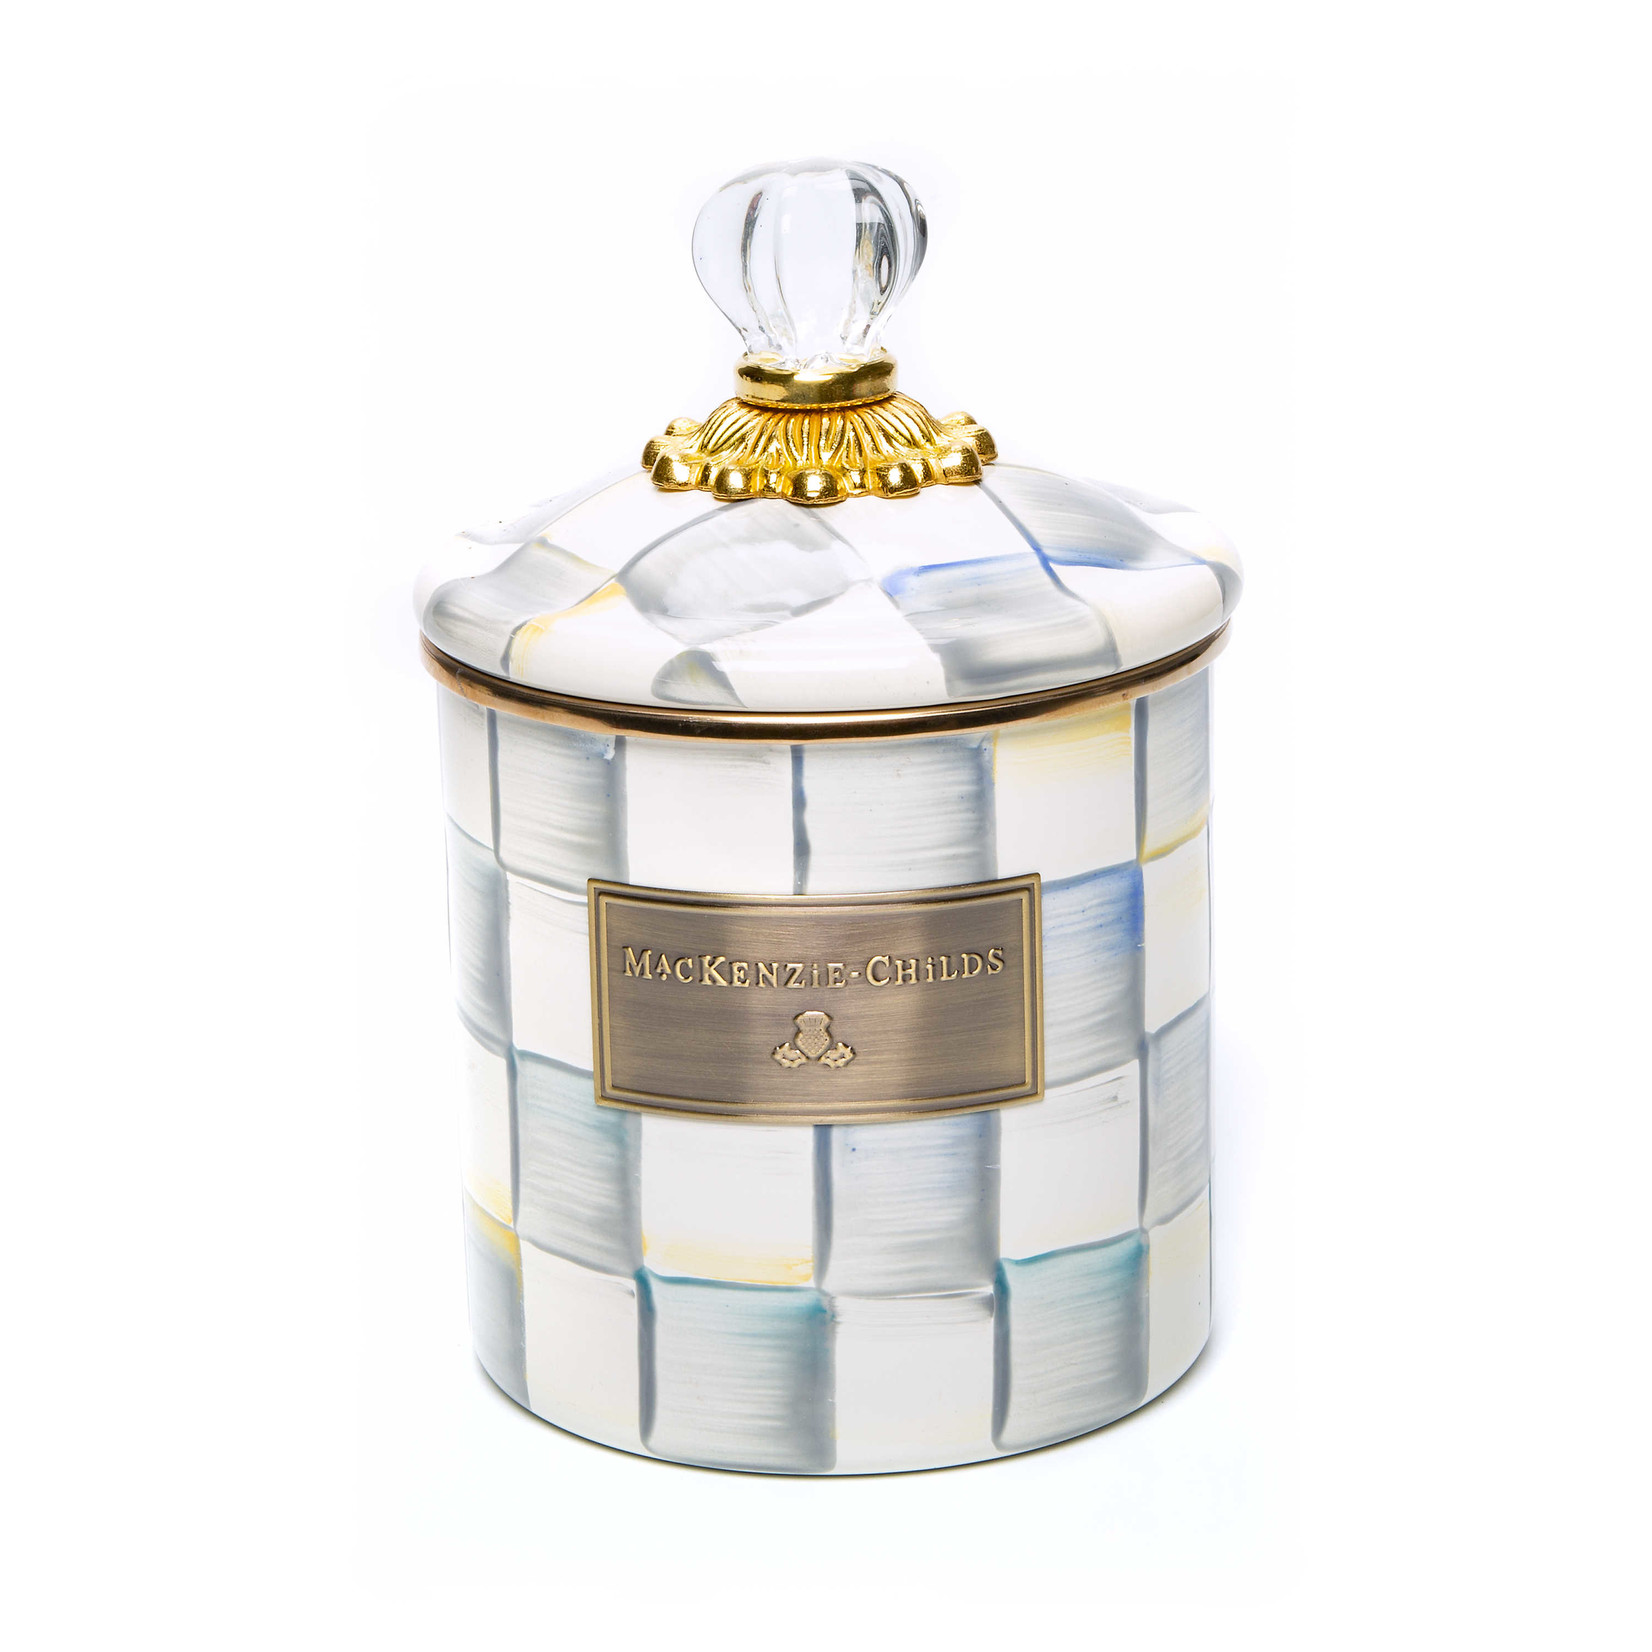 MacKenzie-Childs Sterling Check Enamel Canister - Small